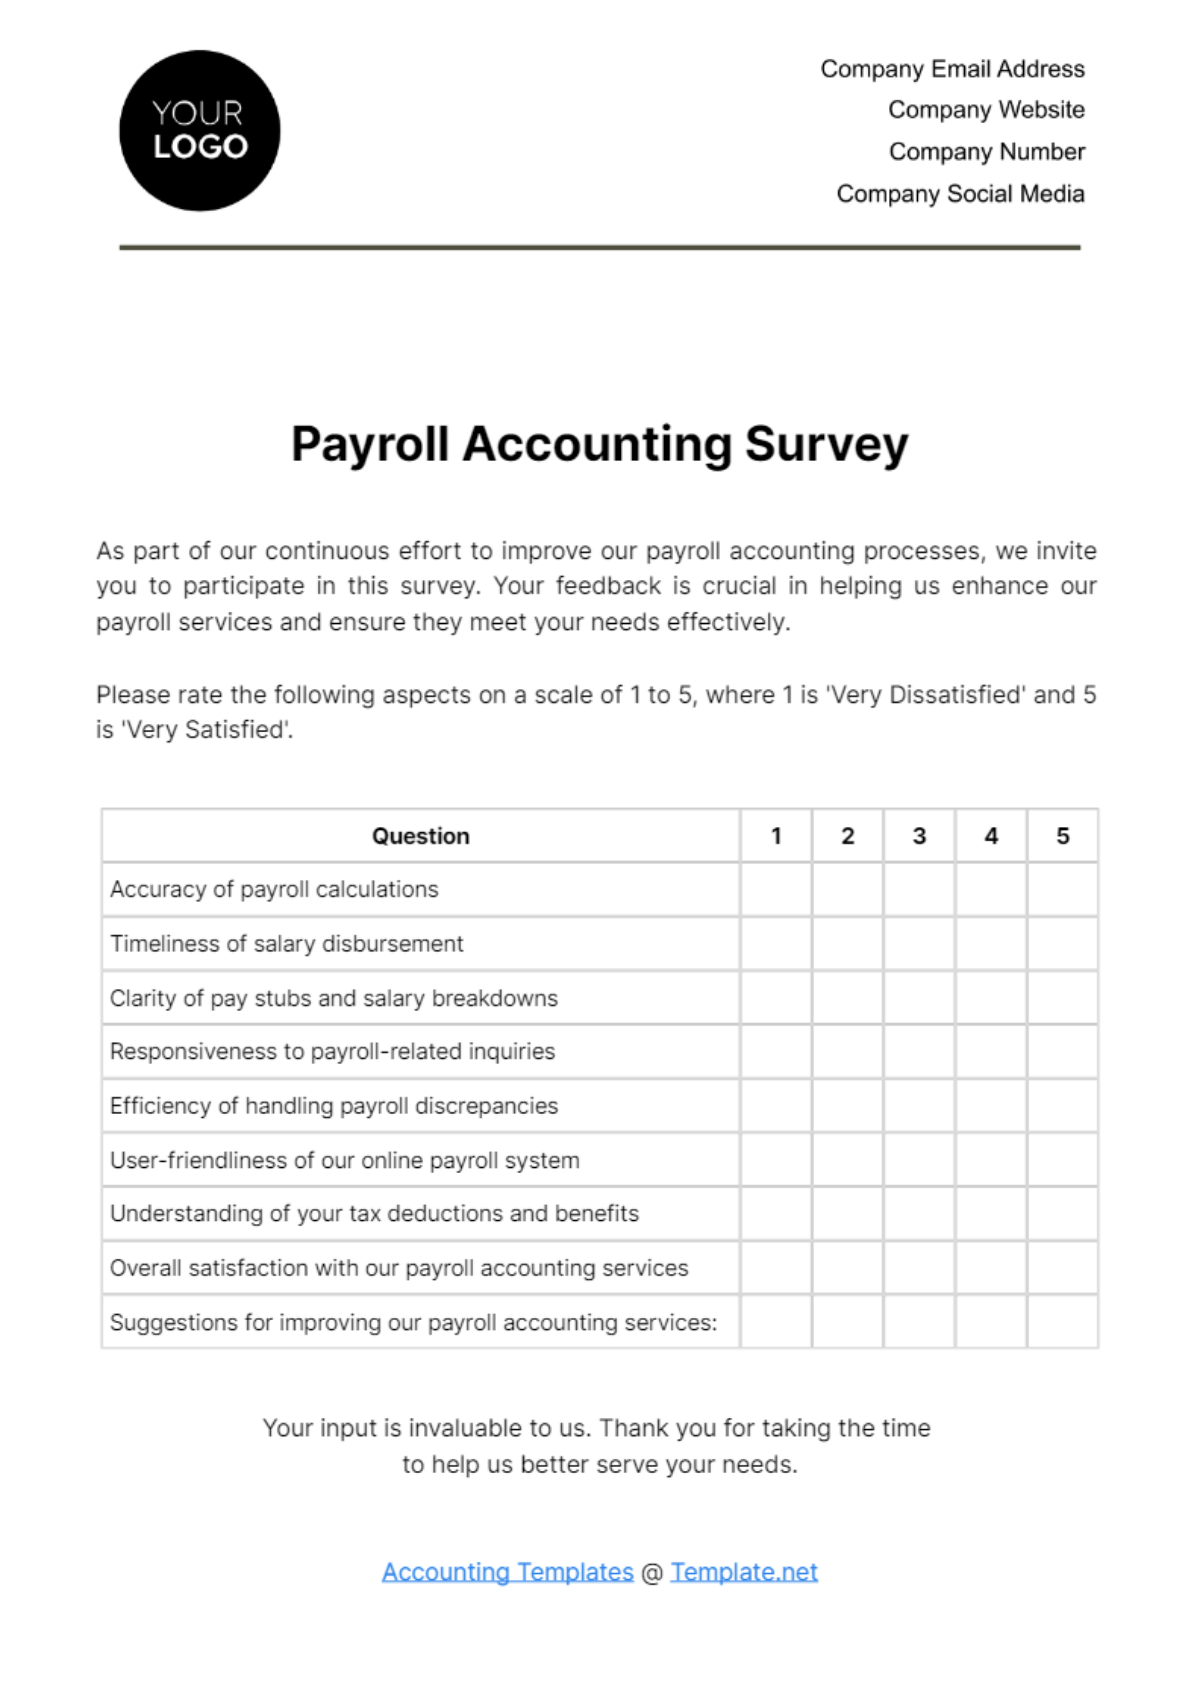 Free Payroll Accounting Survey Template